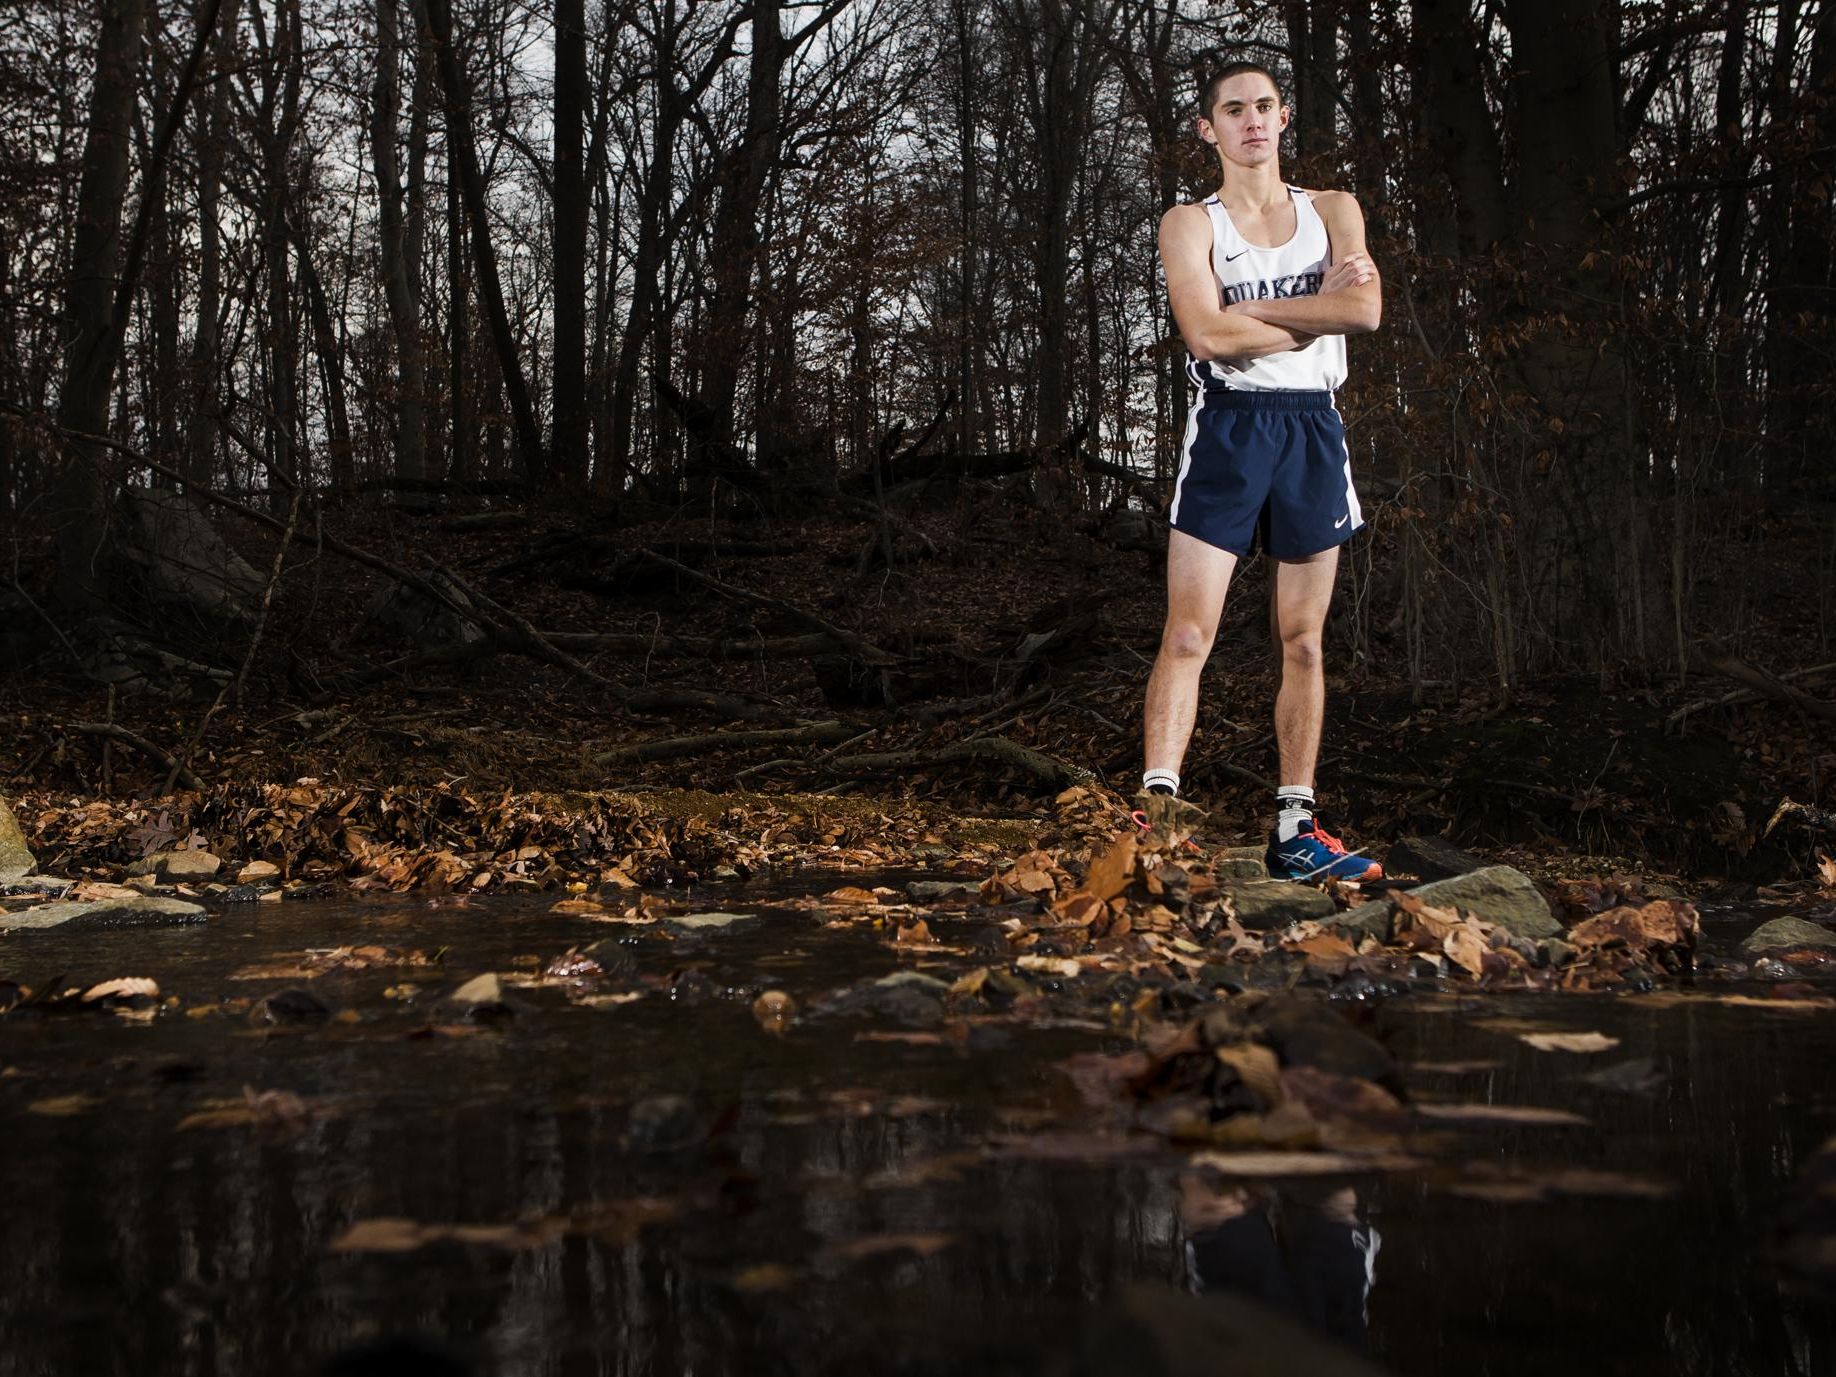 “Tennis has made me a great cross country competitor, and cross country has made me a better tennis player," Connor Nisbet said.